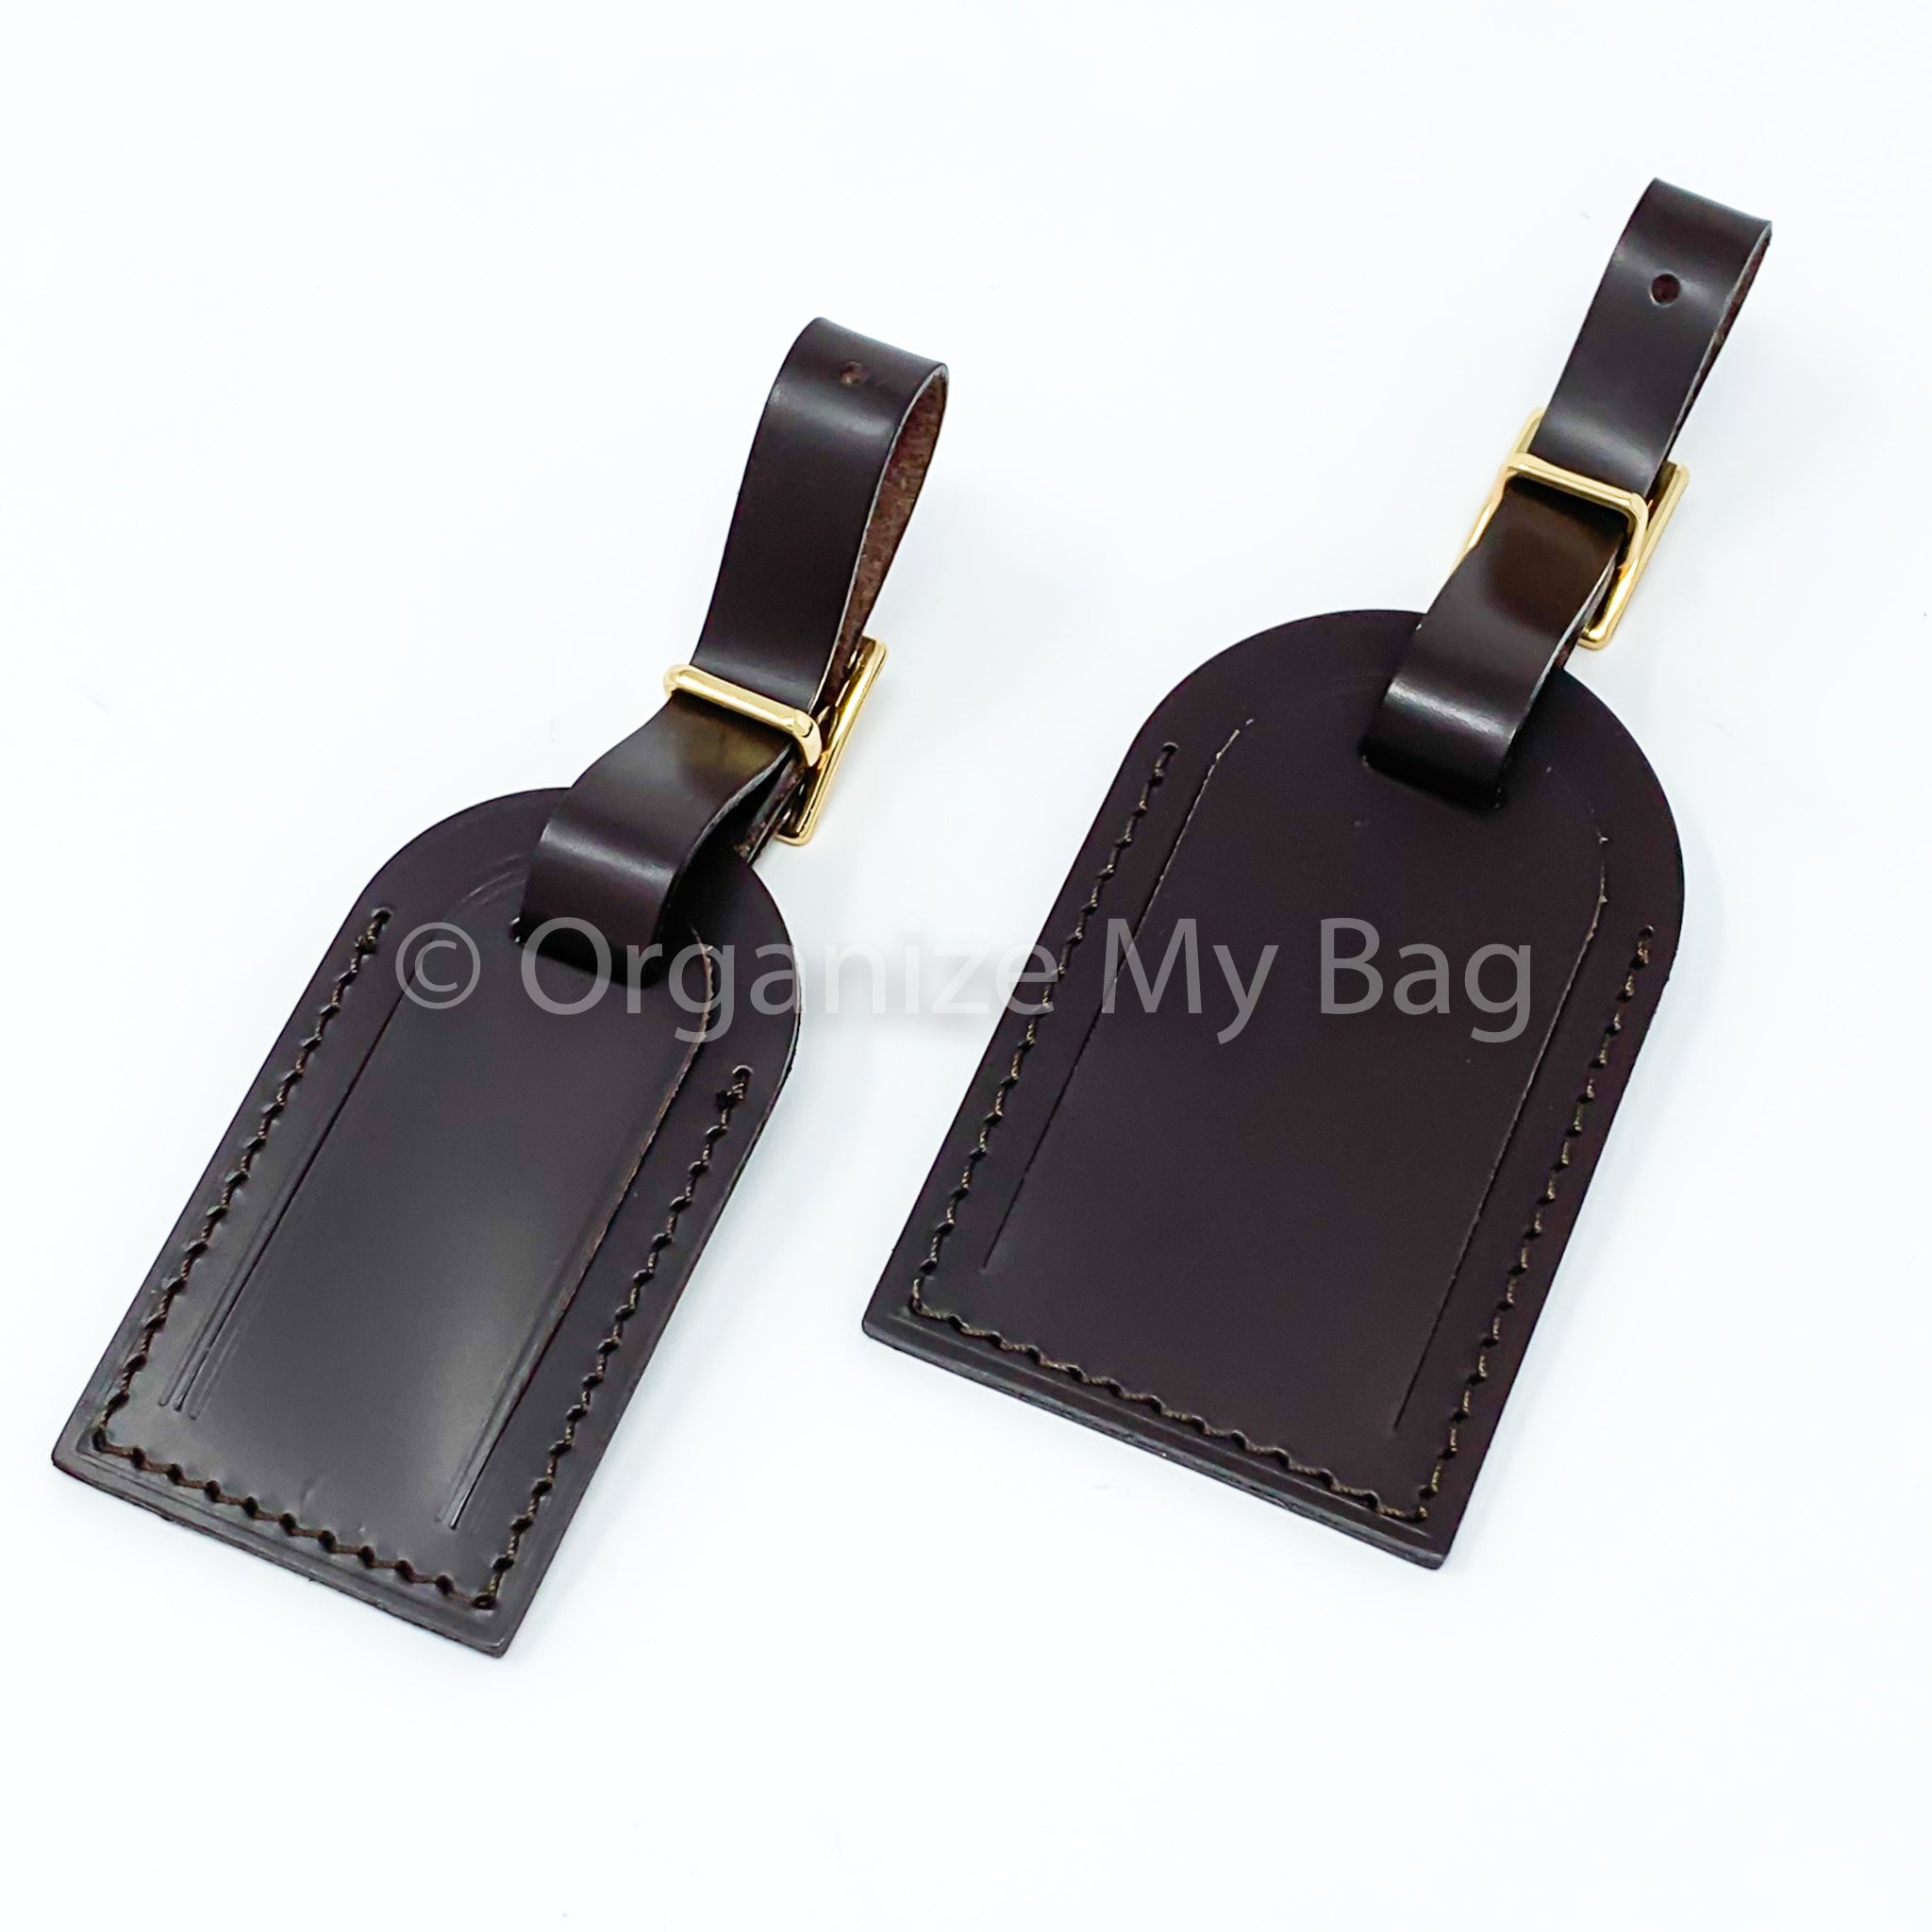 Vachetta Leather Brown Red and Black Luggage Tags Hot -  Israel